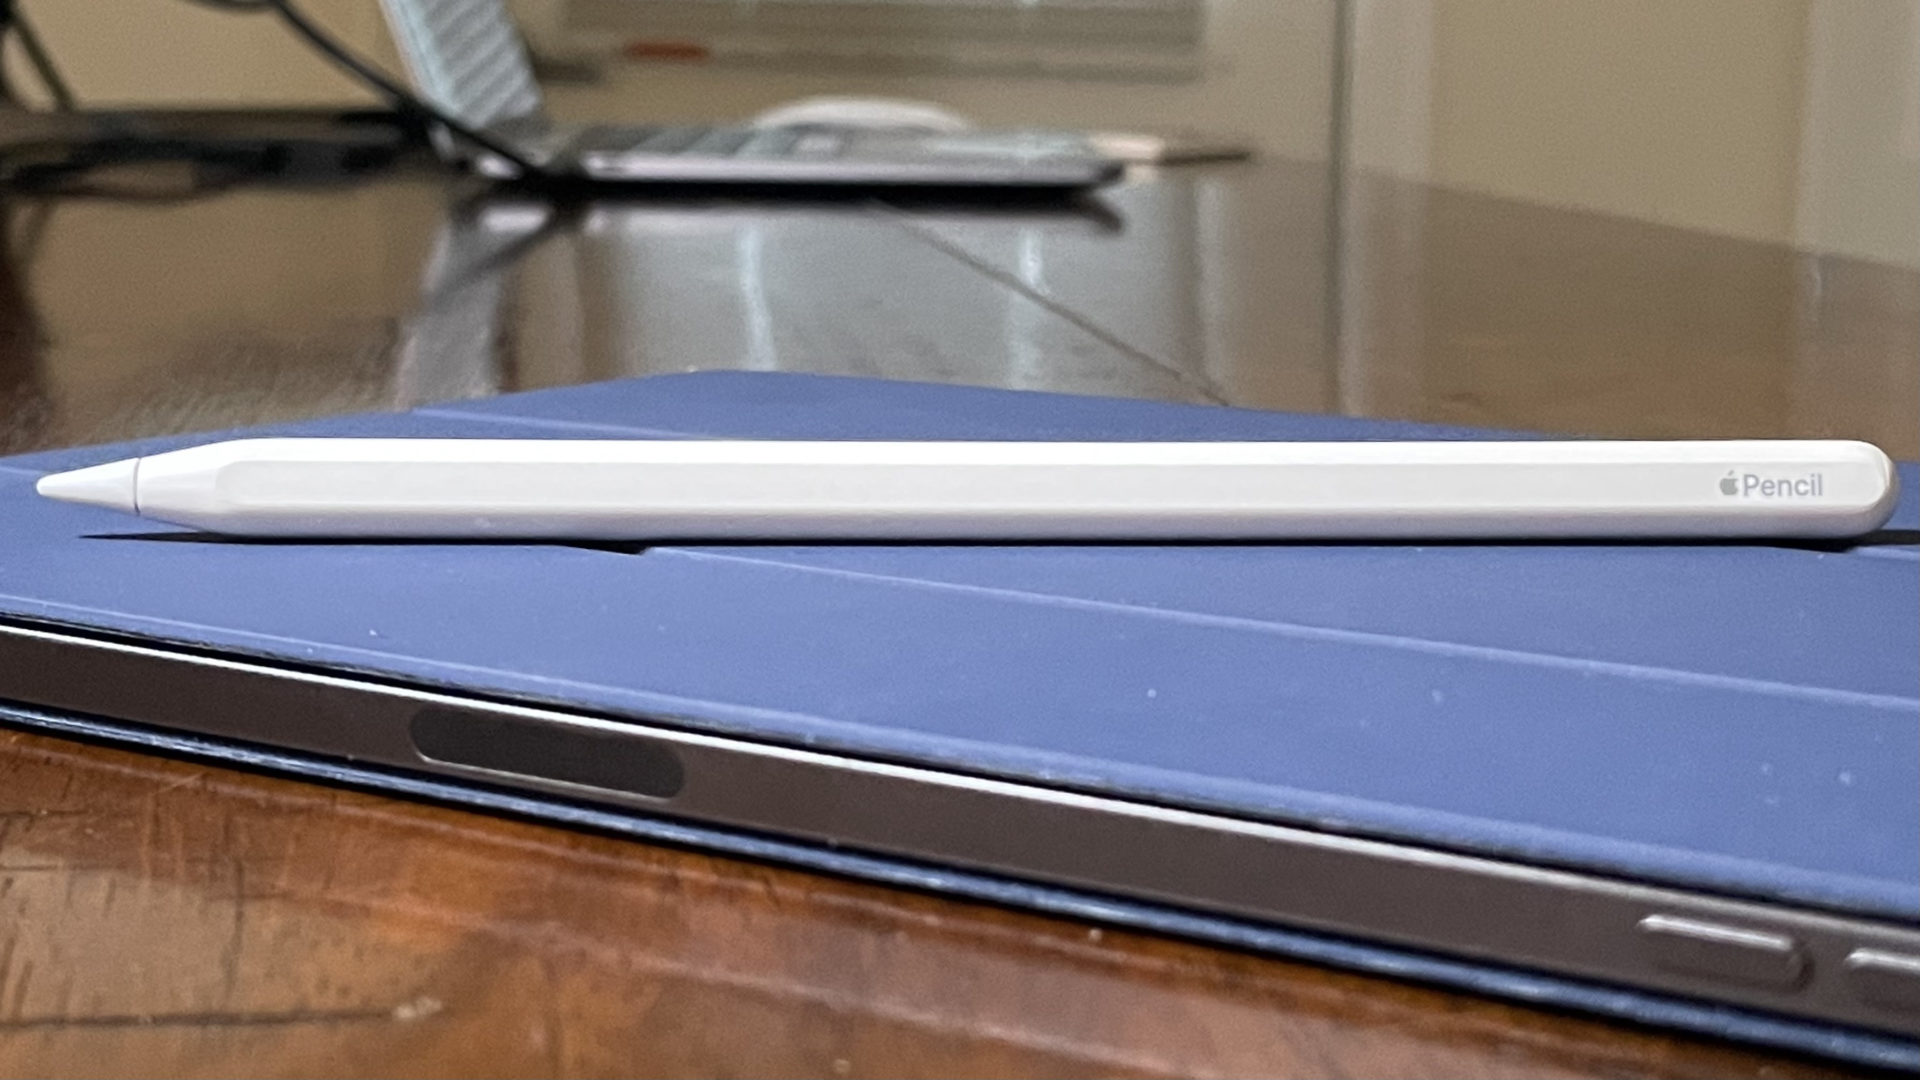 An Apple Pencil sitting on top of an iPad with a blue leather case.